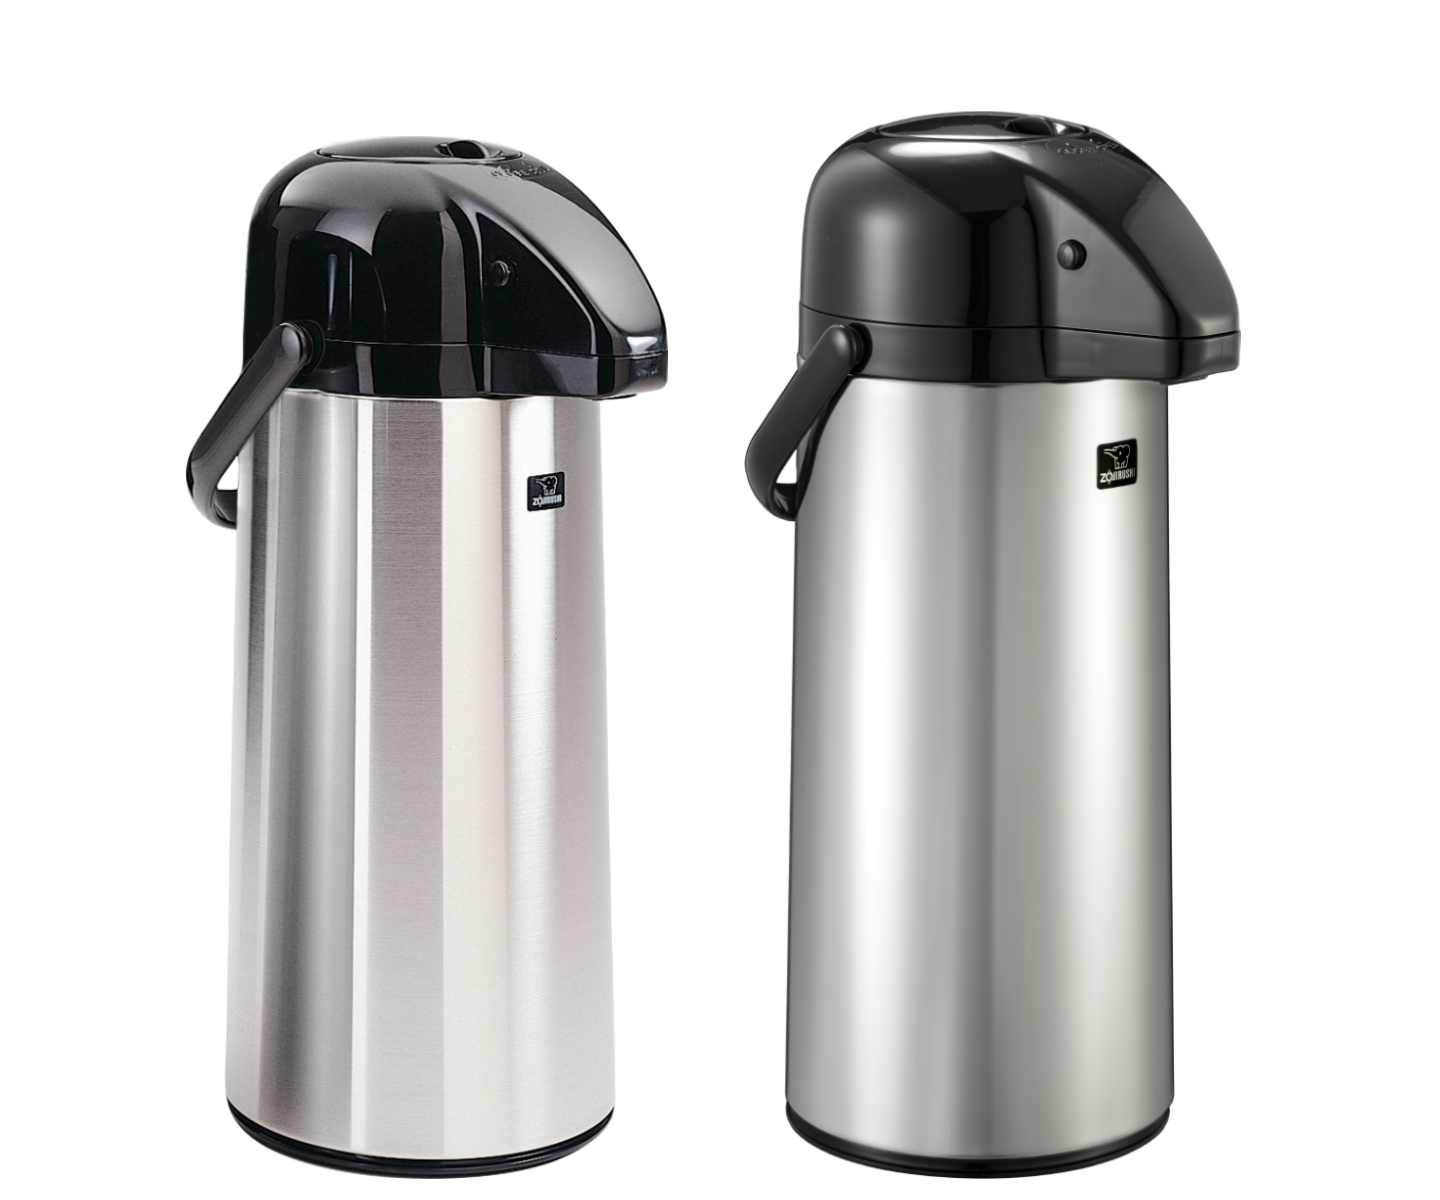 Thermal Coffee Dispenser Airpot with Coffee Air Pump Stainless Steel 2.2  Liter